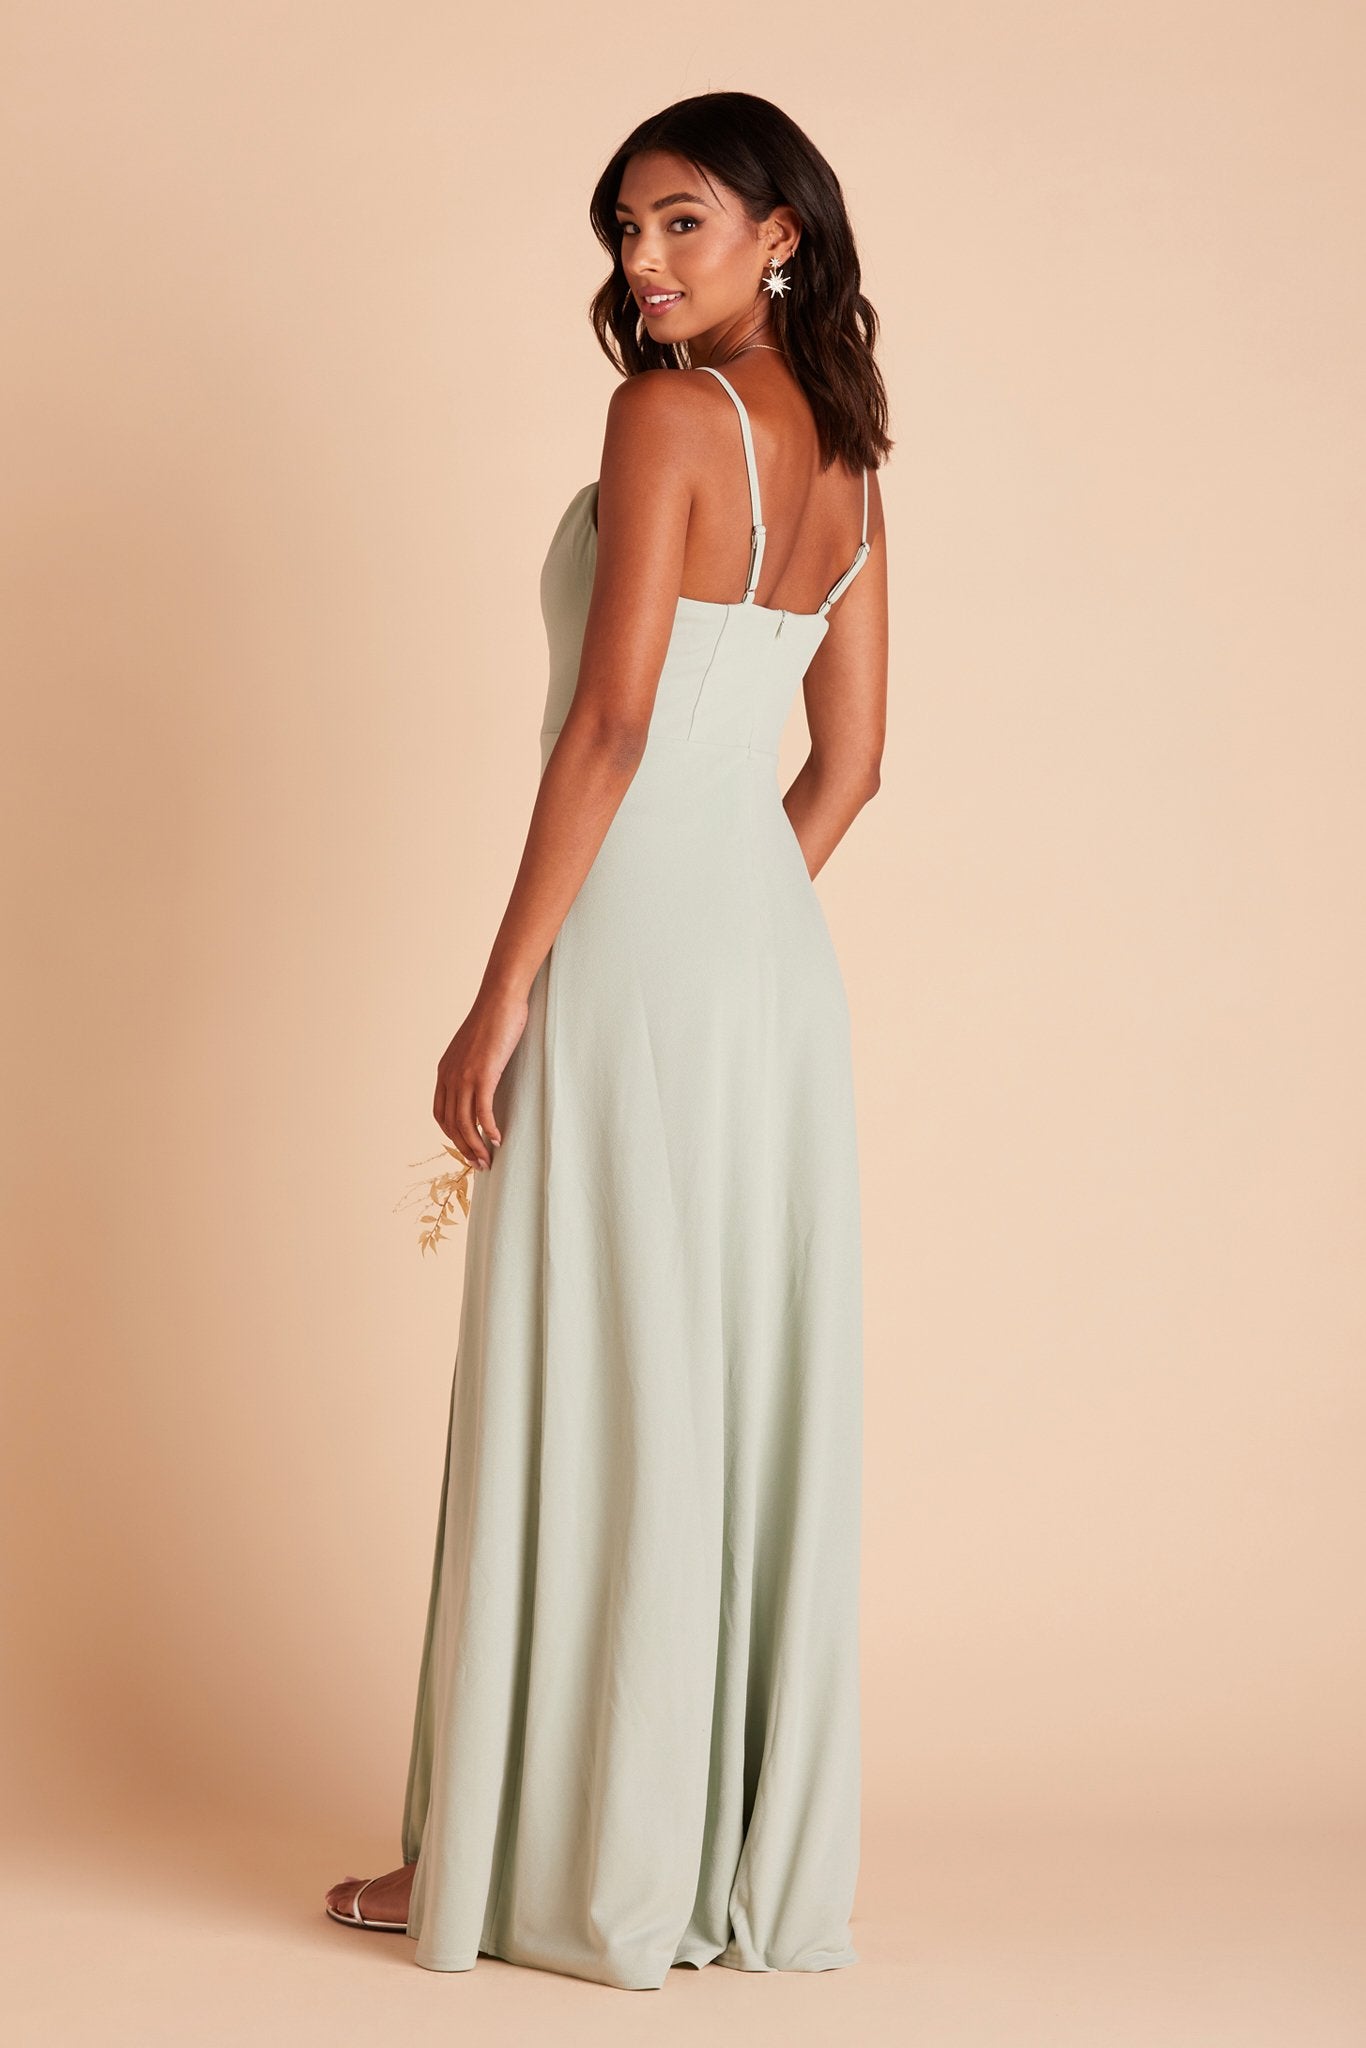 Ash bridesmaid dress in sage green crepe by Birdy Grey, side view